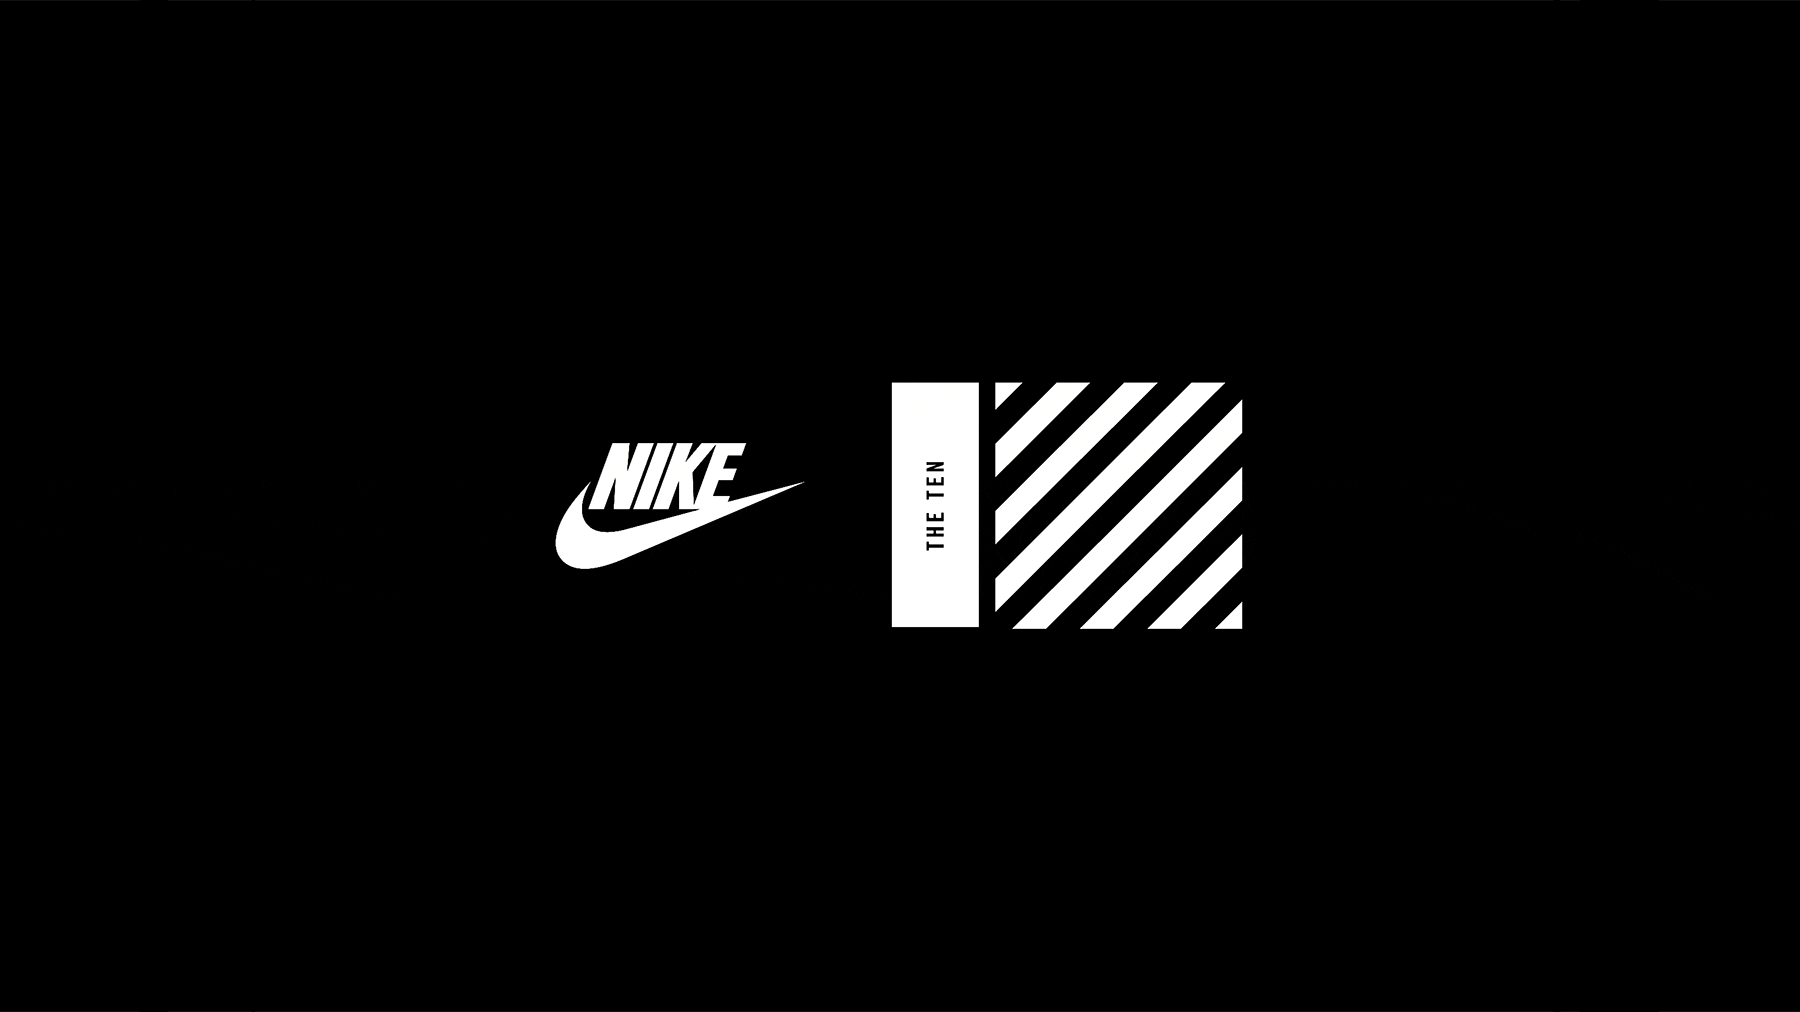 Nike 'The Ten' by Virgil Abloh Graphic Identity & Subbranding